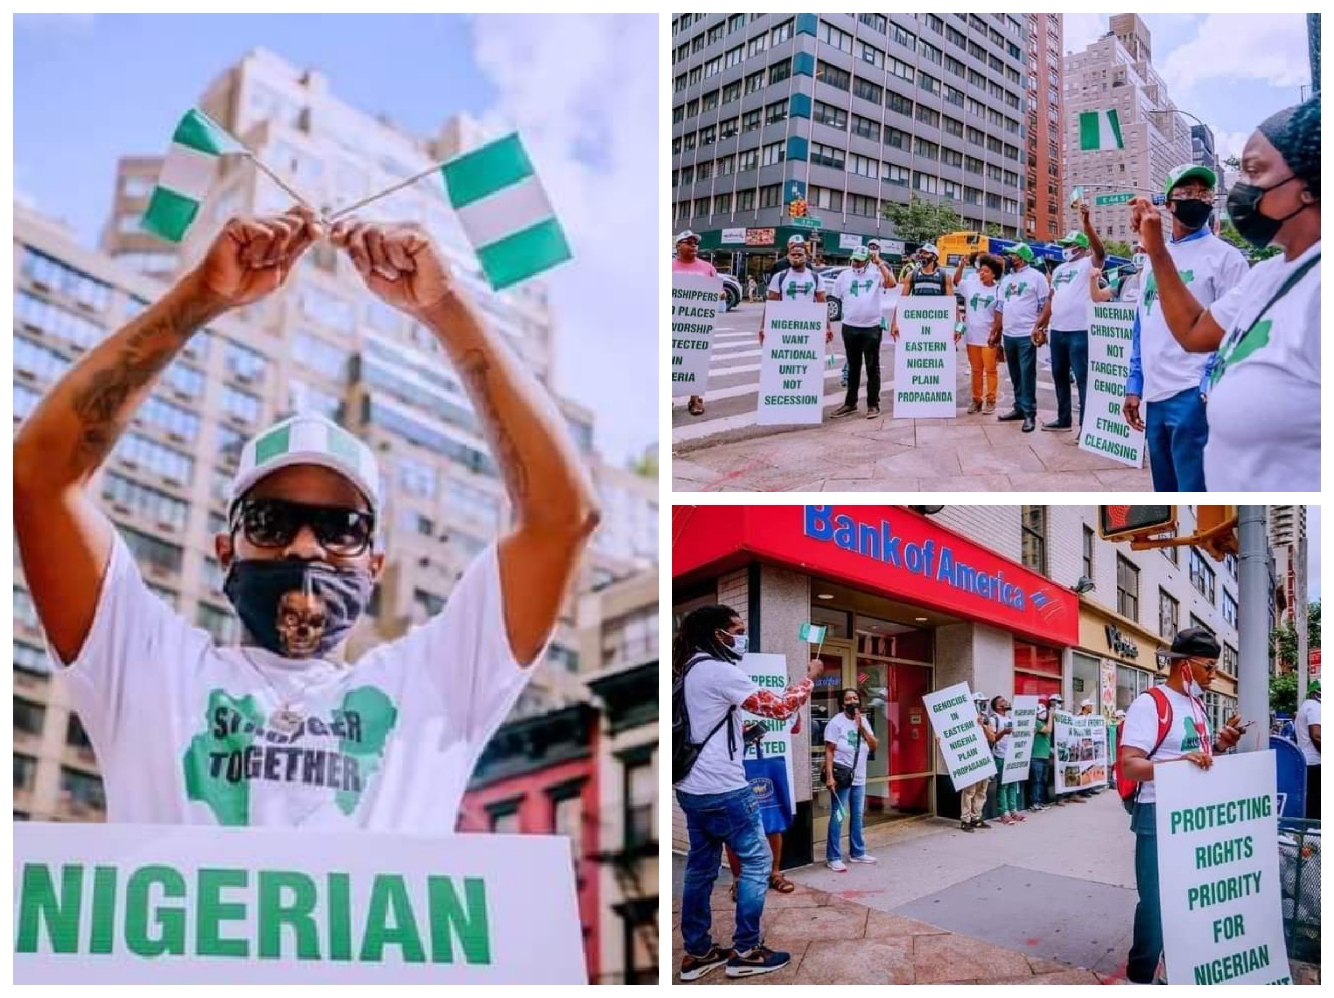 Buhari Supporters Hold Counter Protest In New York - See photos